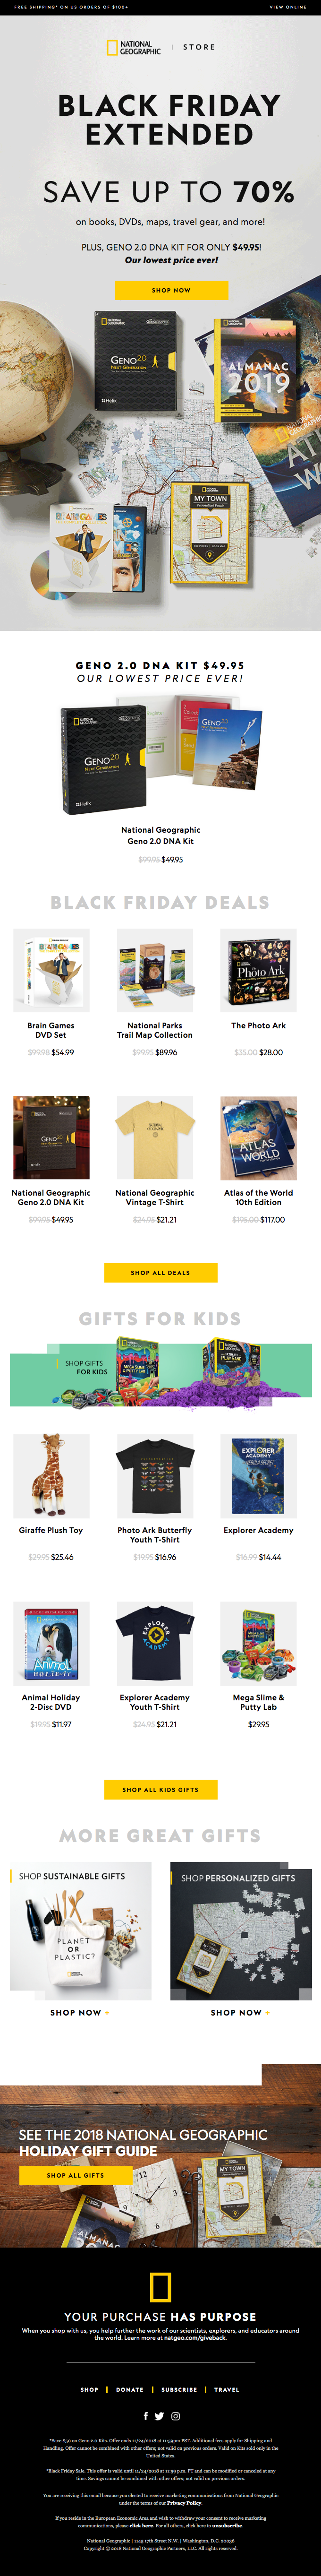 Black Friday Extended – Geno 2.0 for only $49.95 | Save up to 70% on Nat Geo gifts!